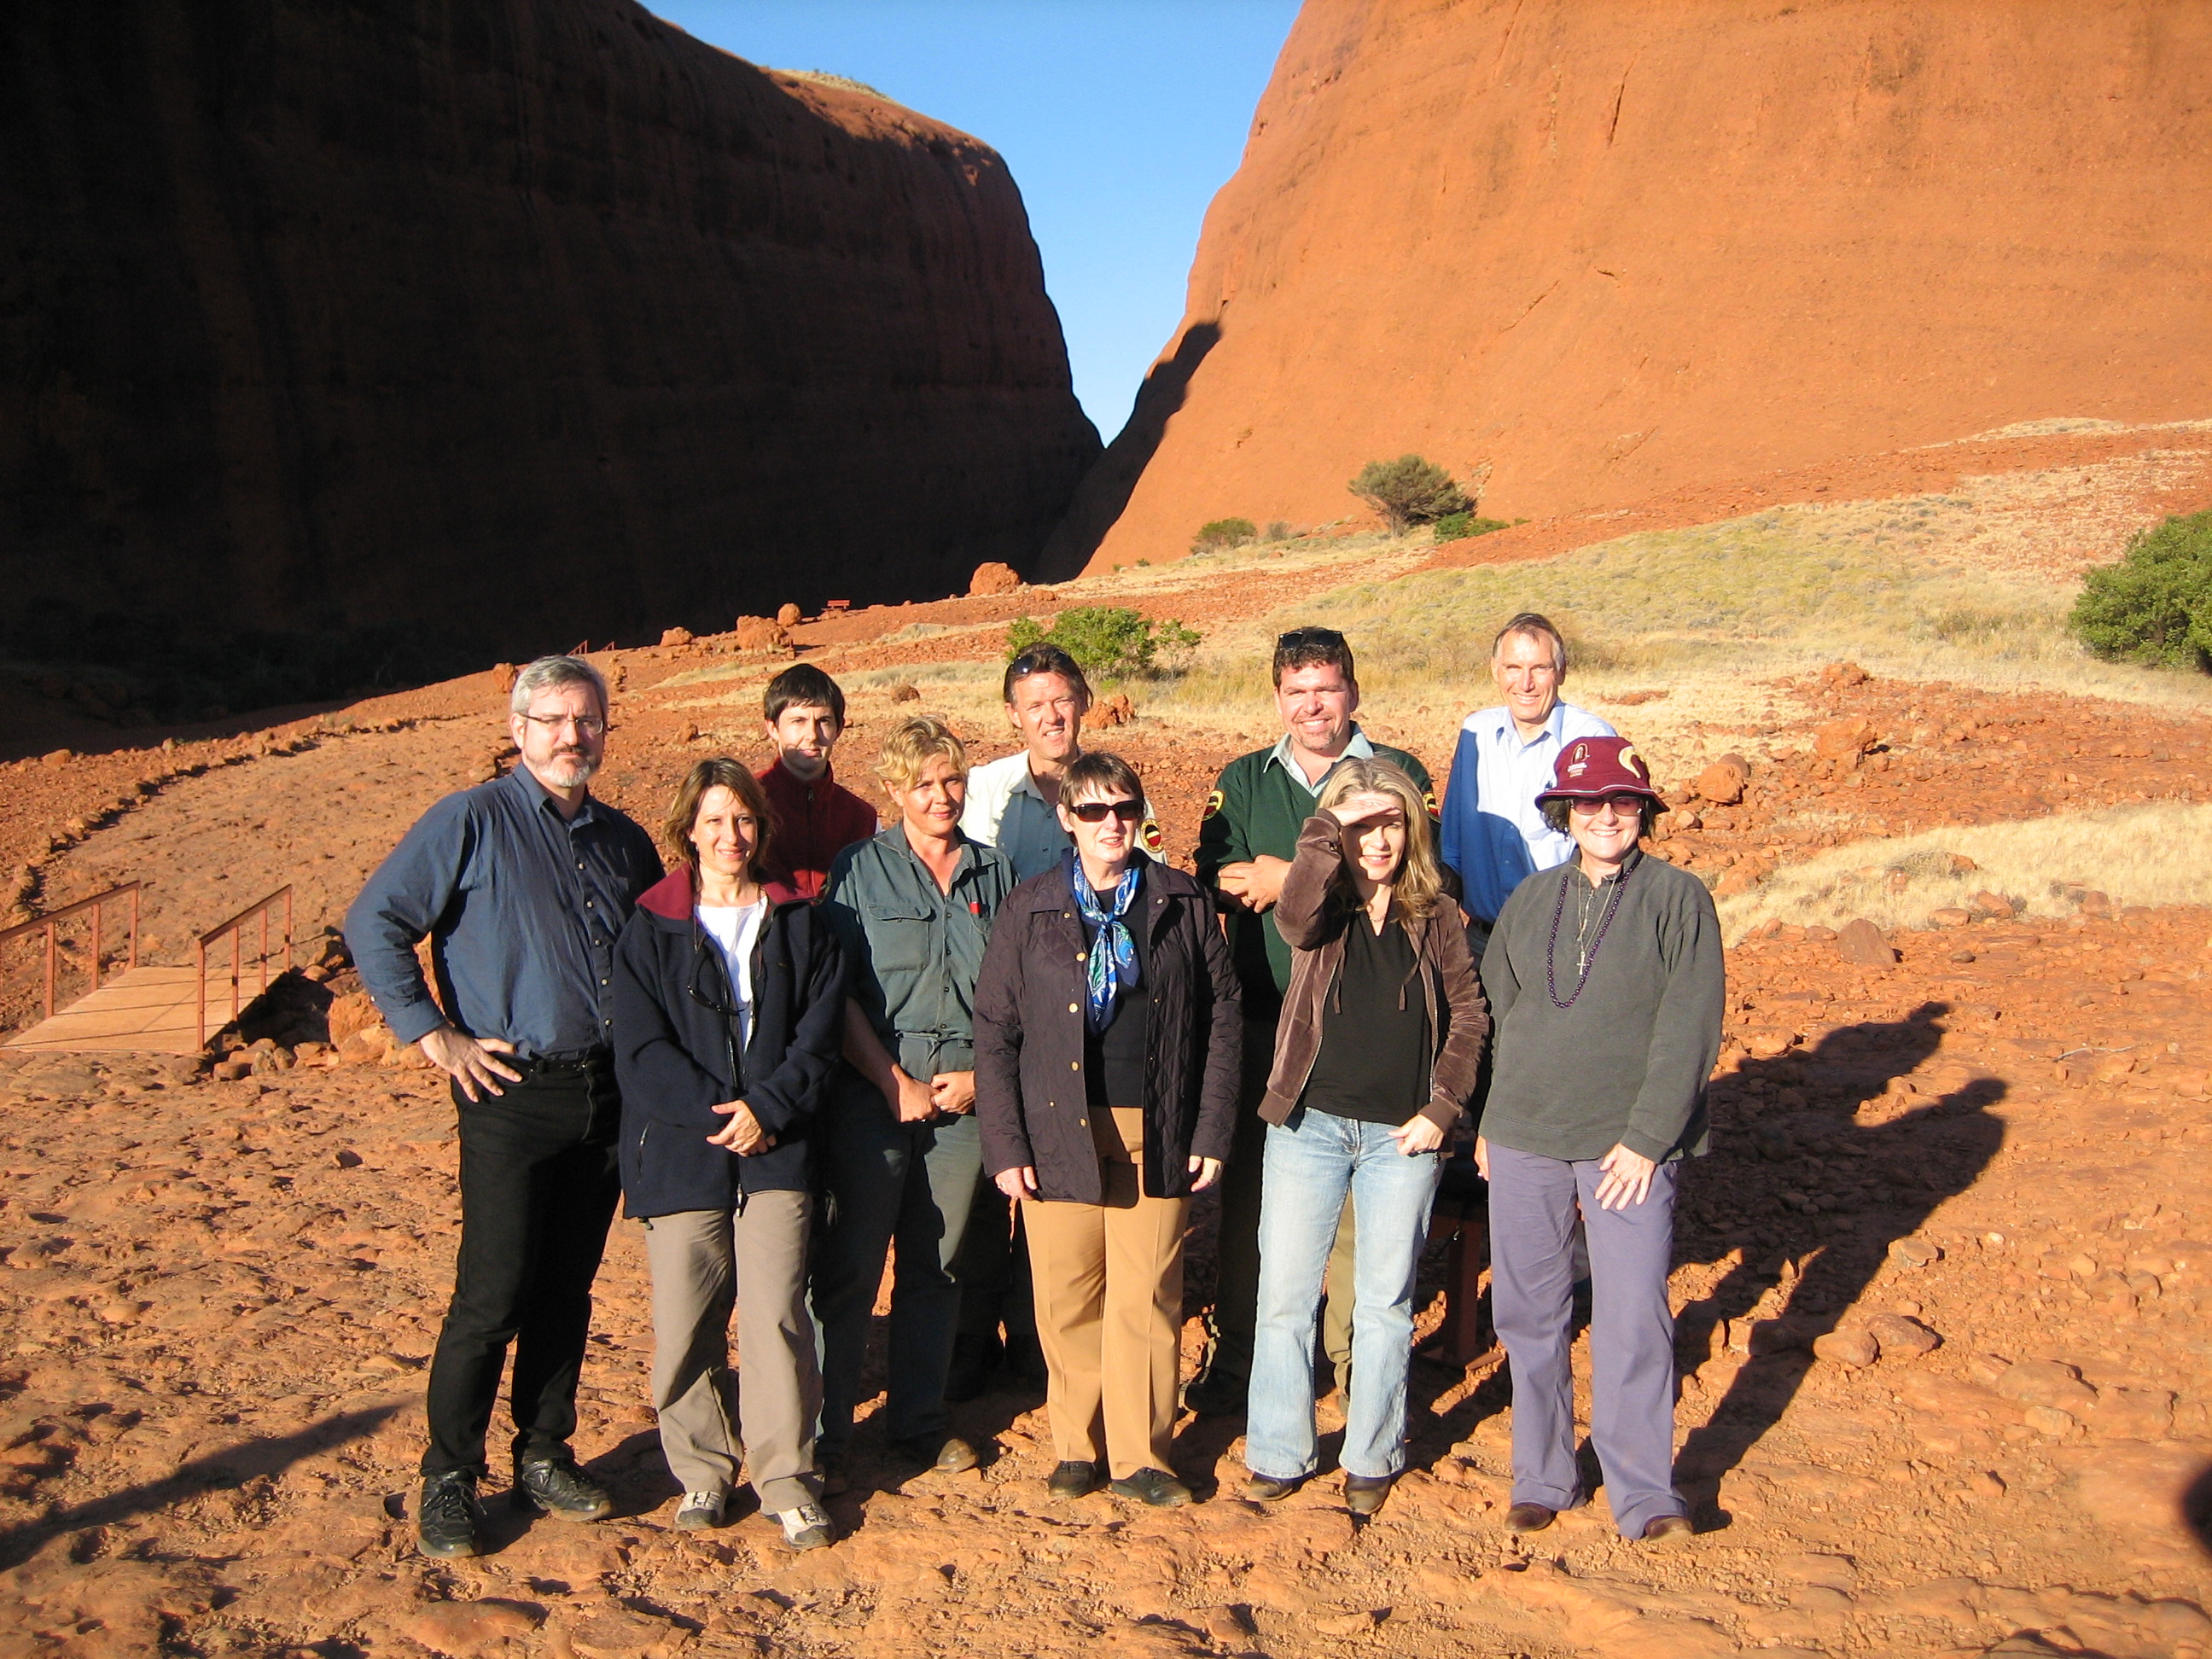 Committee members with Parks Australia staff during a site visit to Uluru-Kata Tjuta National Park as part of its inquiry into the funding and resources available to meet the objectives of Australia's national parks, other conservation reserves and marine protected areas, 27 June 2006. Back row L-R:  Senator Andrew Bartlett [Chair], Dr Ian Holland [Secretary] and three Parks Australia employees. Front row L-R: Dr Jacqueline Dewar [Acting Secretary], a Parks Australia employee, Senators Judith Adams [Deputy Chair], Dana Wortley and Claire Moore.